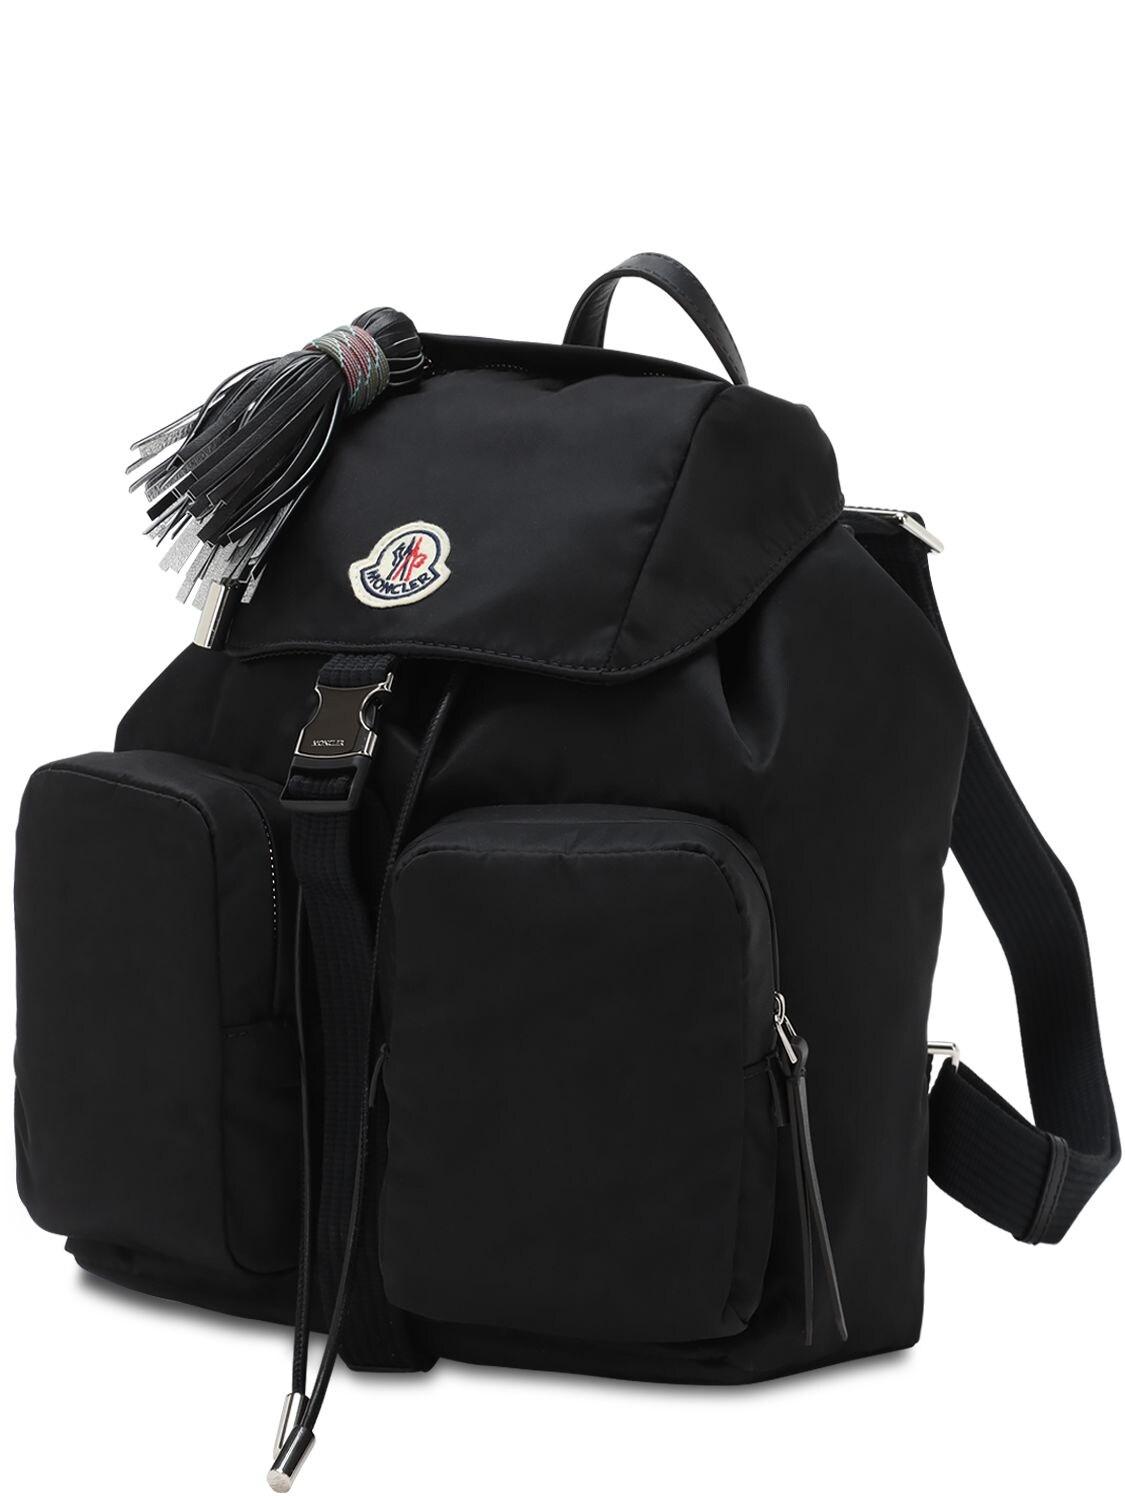 Moncler Synthetic Large Dauphine Nylon Backpack in Black - Lyst